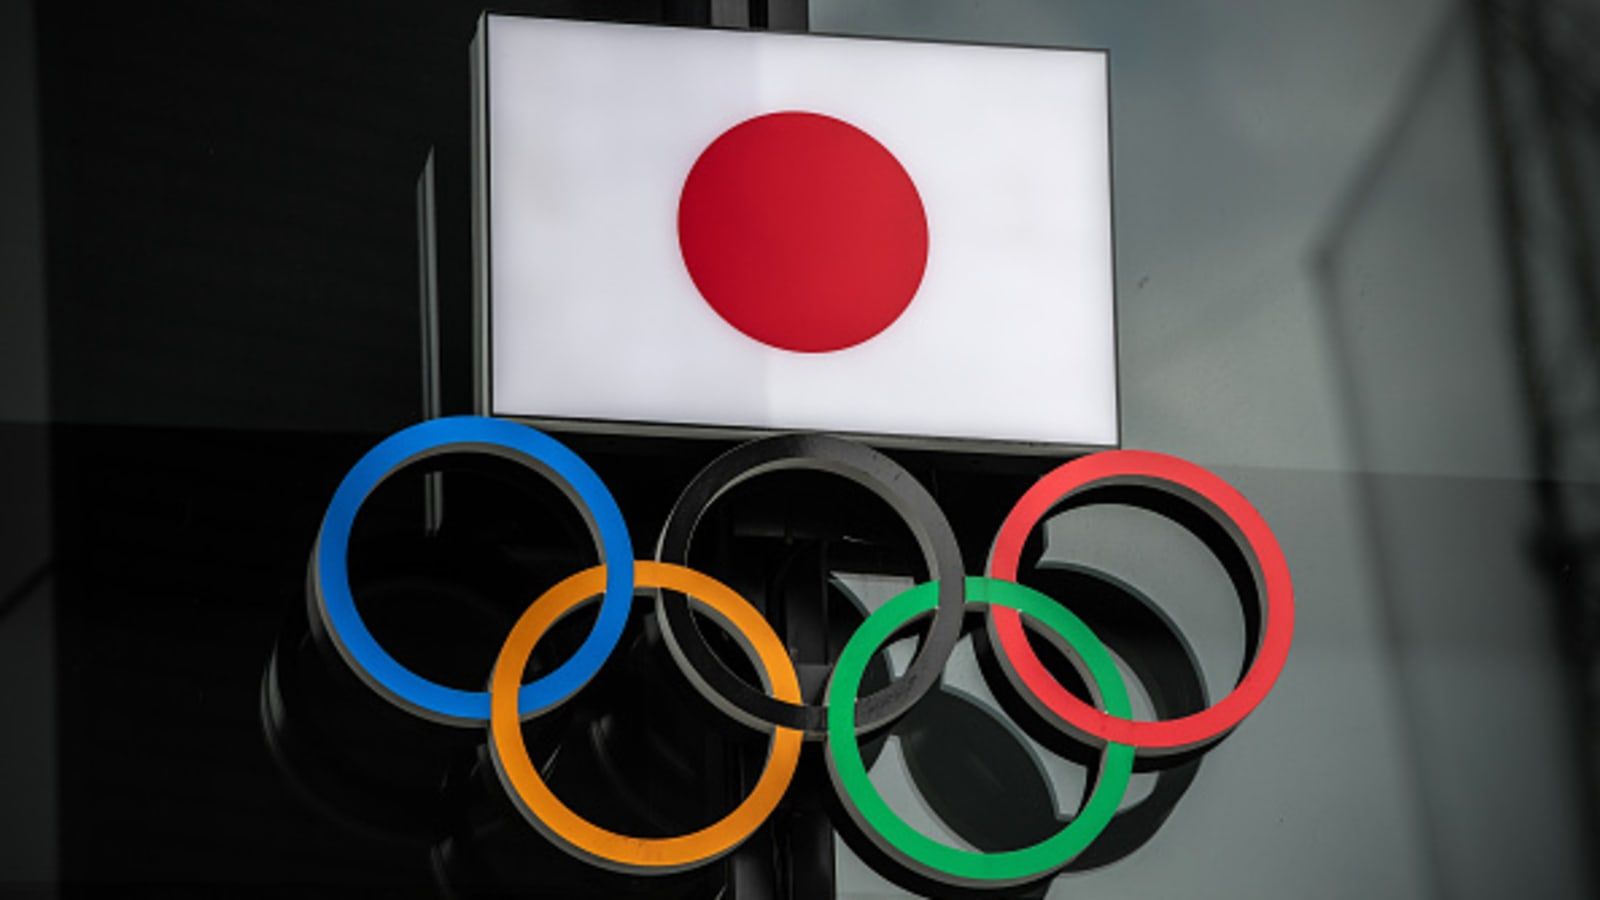 Tokyo Olympics organizers could reportedly choose new president this week